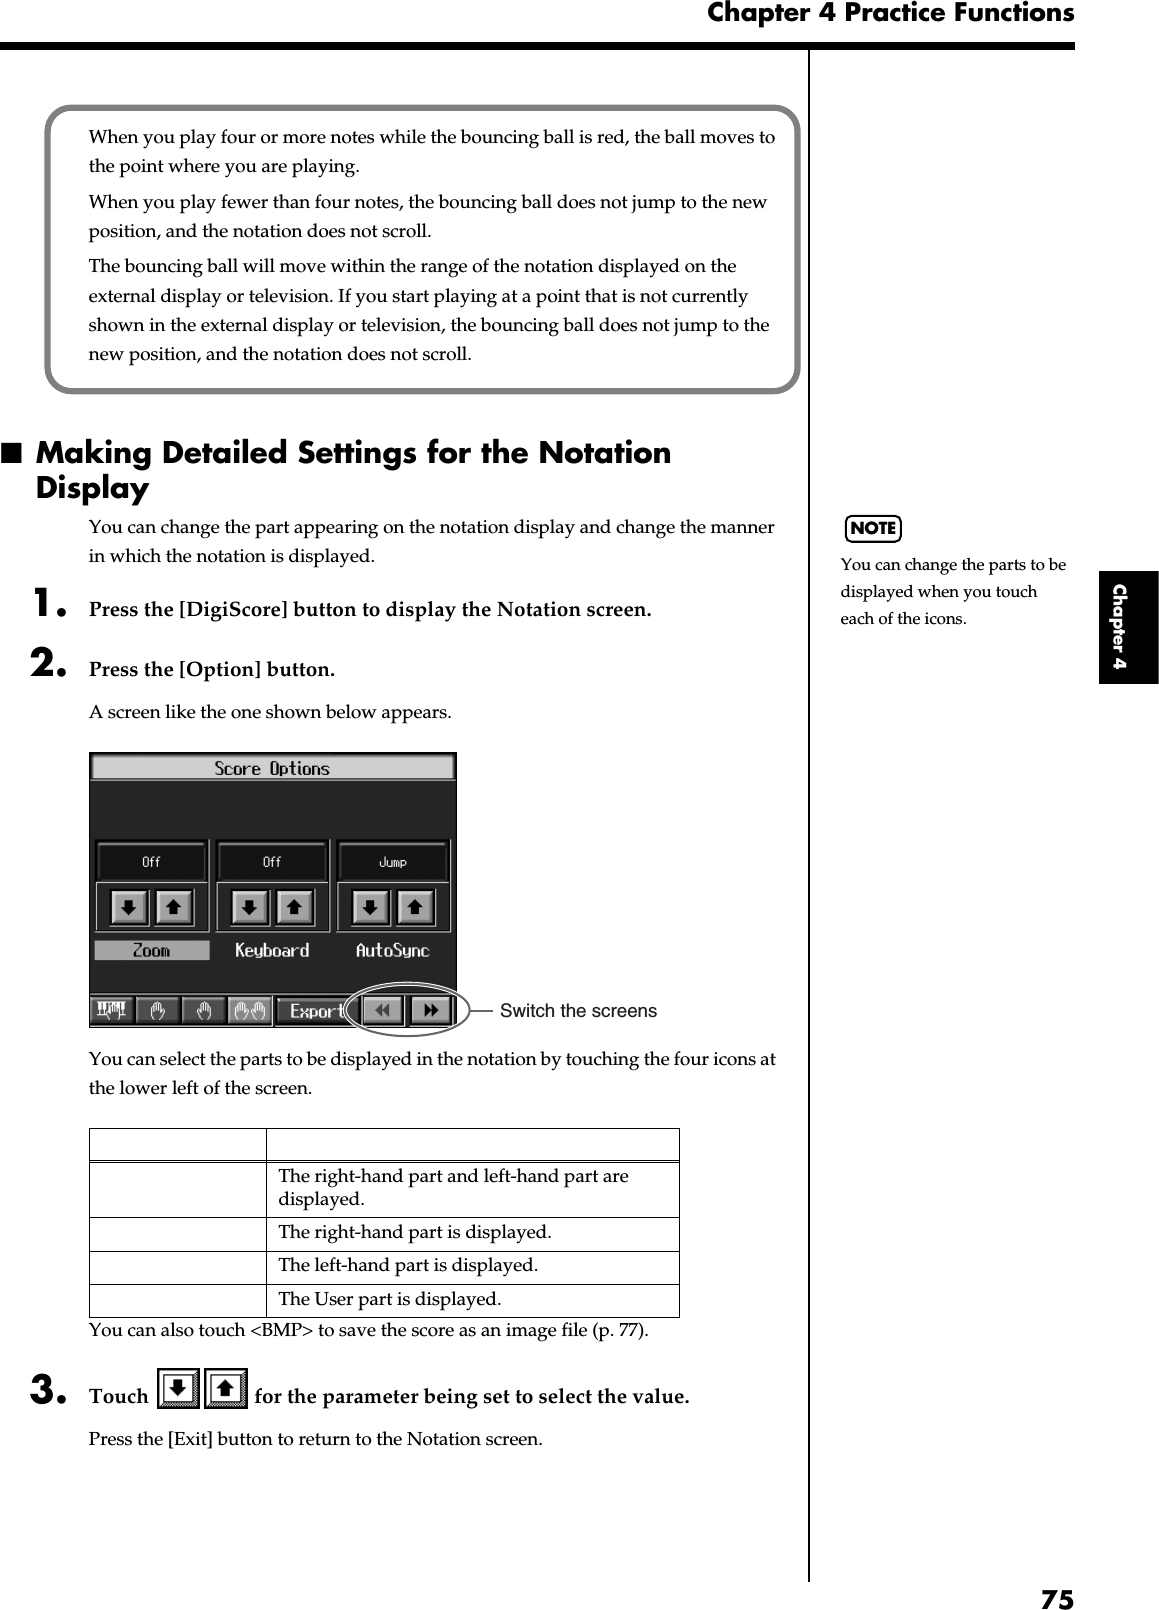 75Chapter 4 Practice FunctionsChapter 4■Making Detailed Settings for the Notation DisplayYou can change the part appearing on the notation display and change the manner in which the notation is displayed.1. Press the [DigiScore] button to display the Notation screen.2. Press the [Option] button.A screen like the one shown below appears.fig.d-notationopt.eps_60You can select the parts to be displayed in the notation by touching the four icons at the lower left of the screen.You can also touch &lt;BMP&gt; to save the score as an image file (p. 77).3. Touch   for the parameter being set to select the value.Press the [Exit] button to return to the Notation screen.The right-hand part and left-hand part are displayed.The right-hand part is displayed.The left-hand part is displayed.The User part is displayed.When you play four or more notes while the bouncing ball is red, the ball moves to the point where you are playing.When you play fewer than four notes, the bouncing ball does not jump to the new position, and the notation does not scroll.The bouncing ball will move within the range of the notation displayed on the external display or television. If you start playing at a point that is not currently shown in the external display or television, the bouncing ball does not jump to the new position, and the notation does not scroll.NOTEYou can change the parts to be displayed when you touch each of the icons.Switch the screens